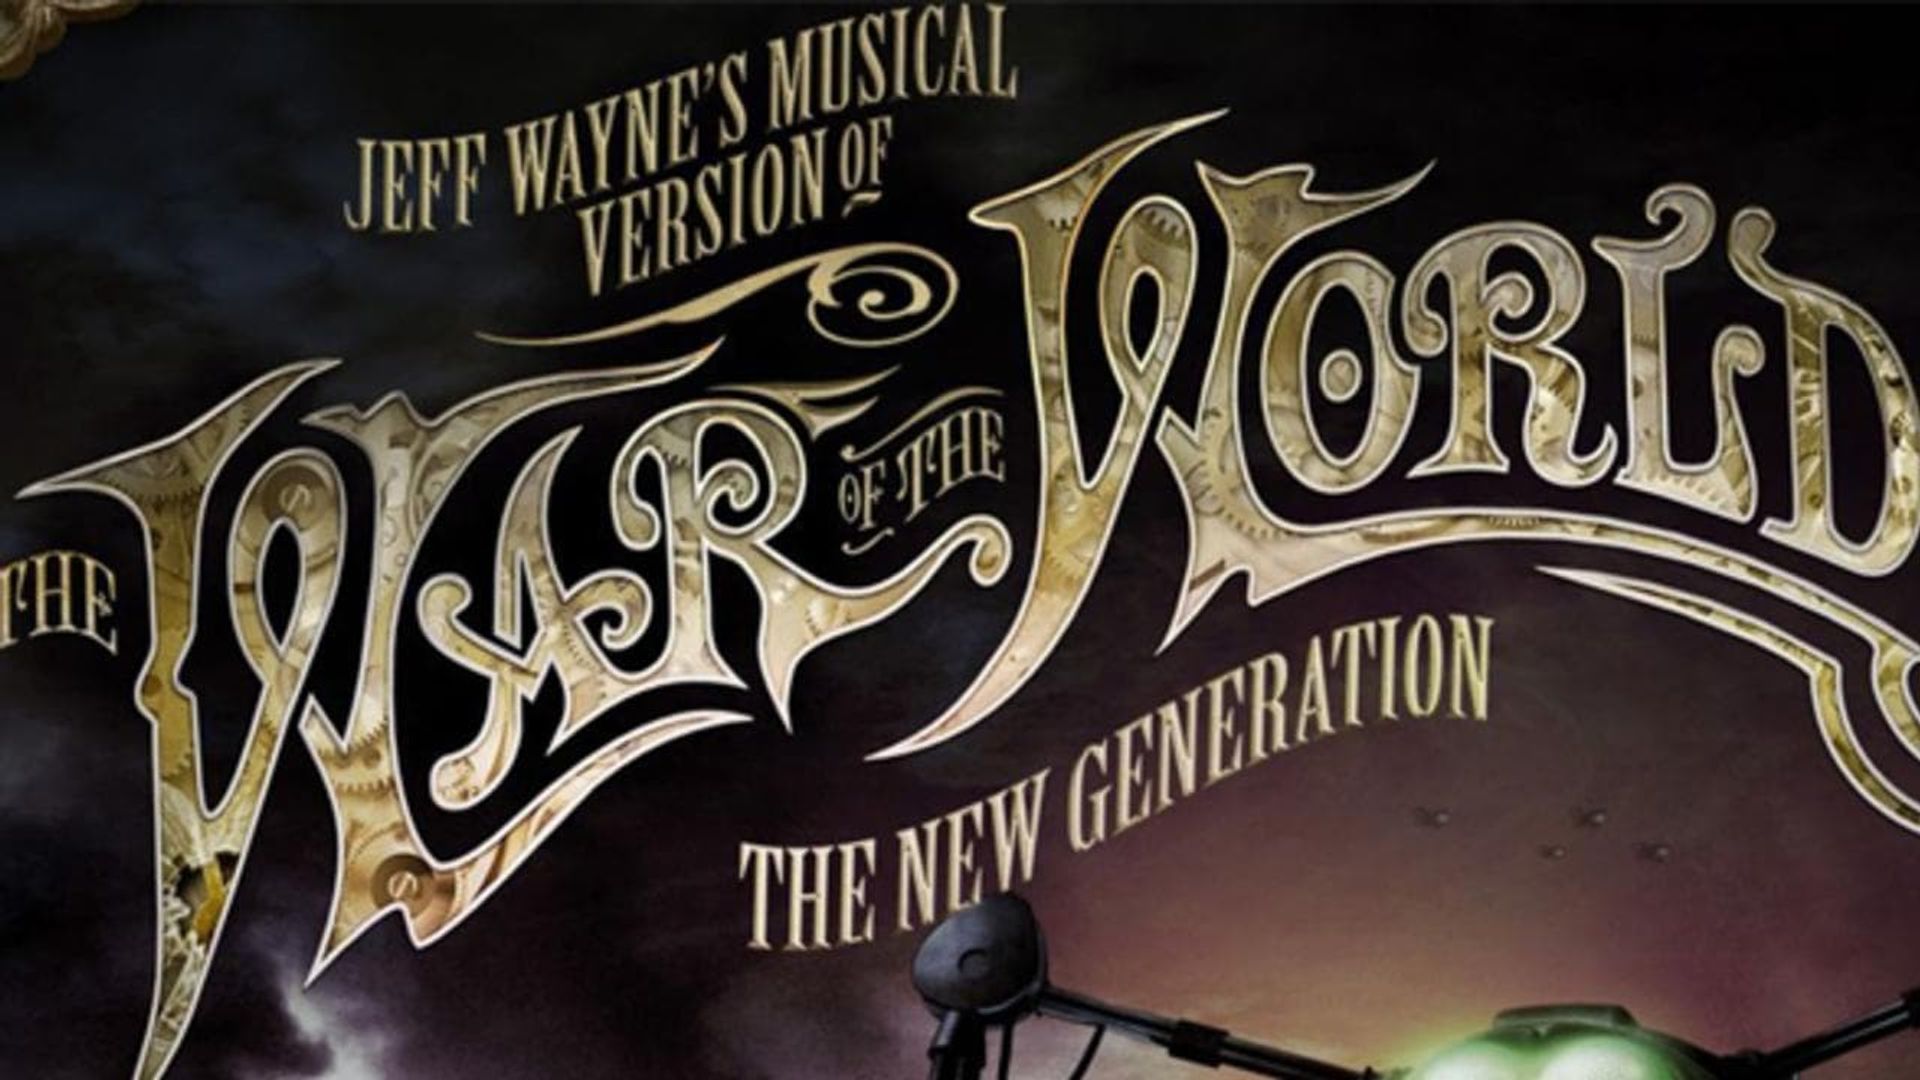 Jeff Wayne's Musical Version of the War of the Worlds Alive on Stage! The New Generation background